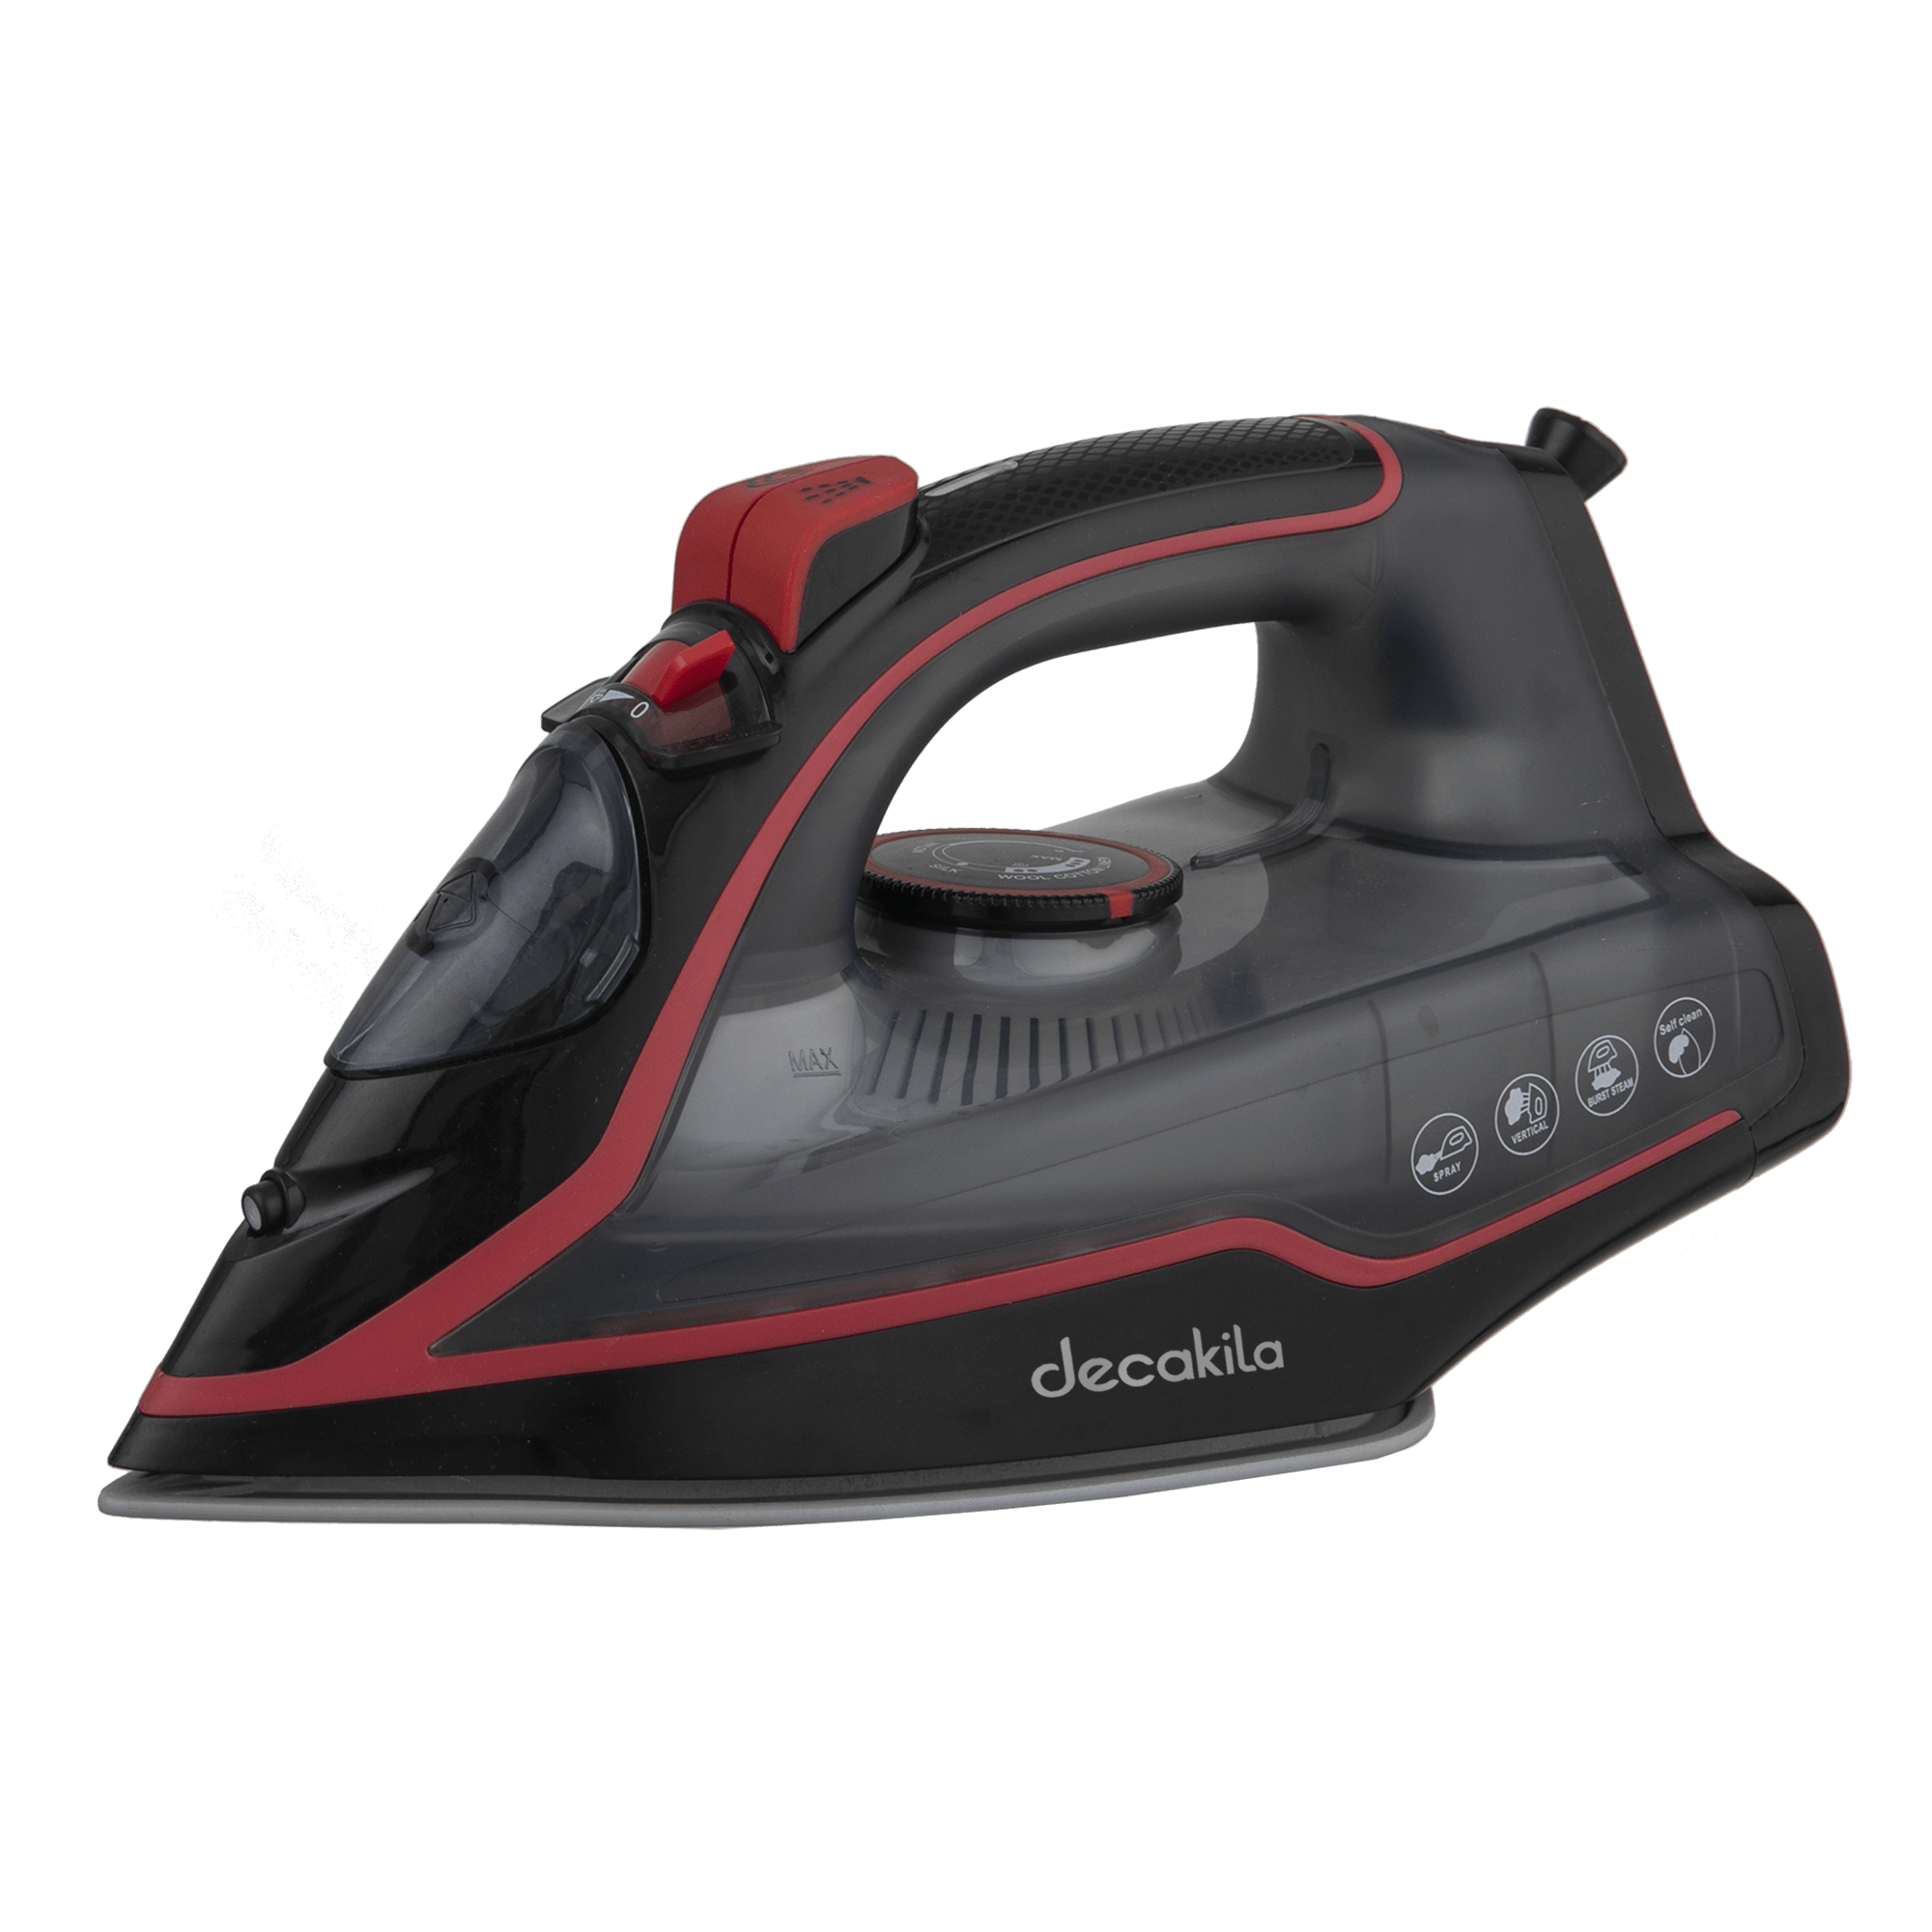 Buy Decakila Steam Iron 2400W - KEEN001W Online in Ghana - Supply Master Electric Iron Buy Tools hardware Building materials